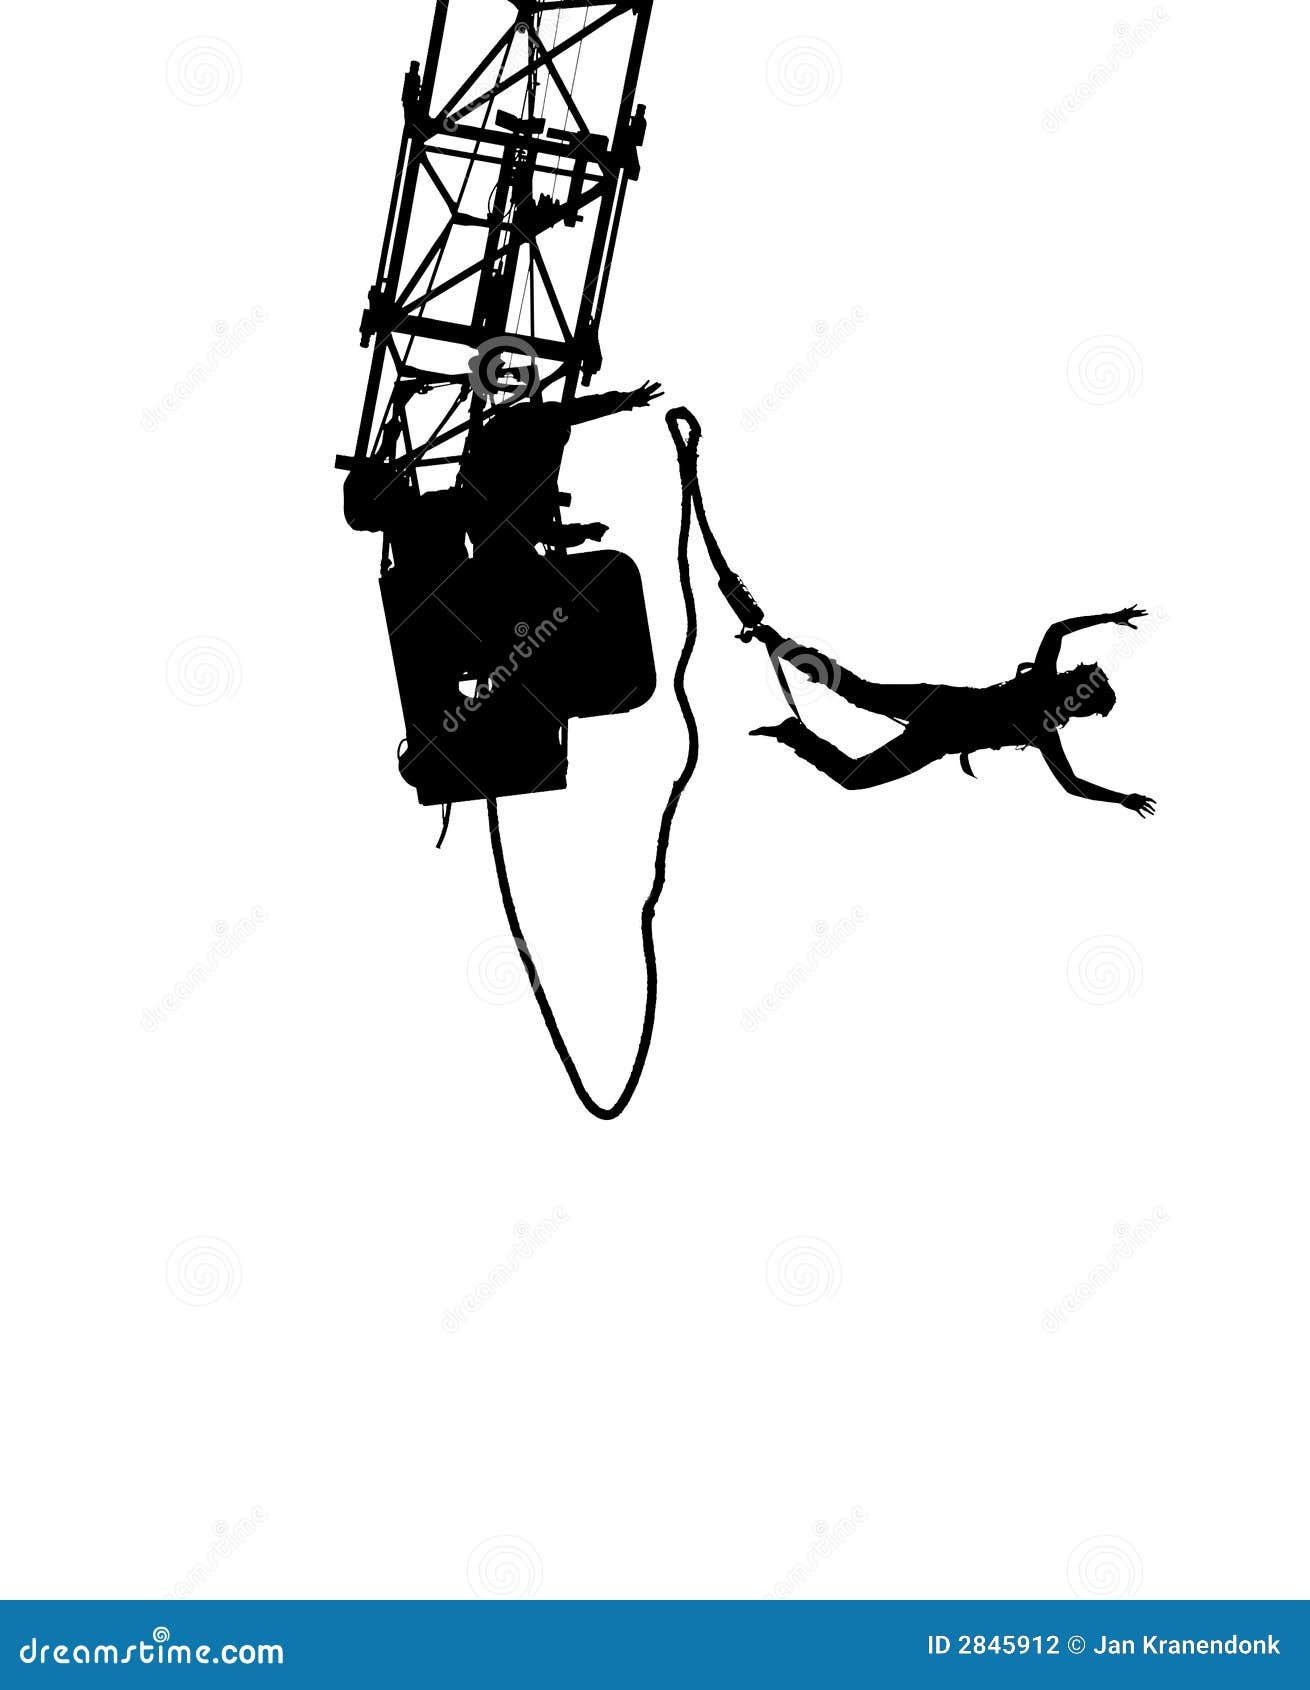 clipart bungee jumping - photo #26